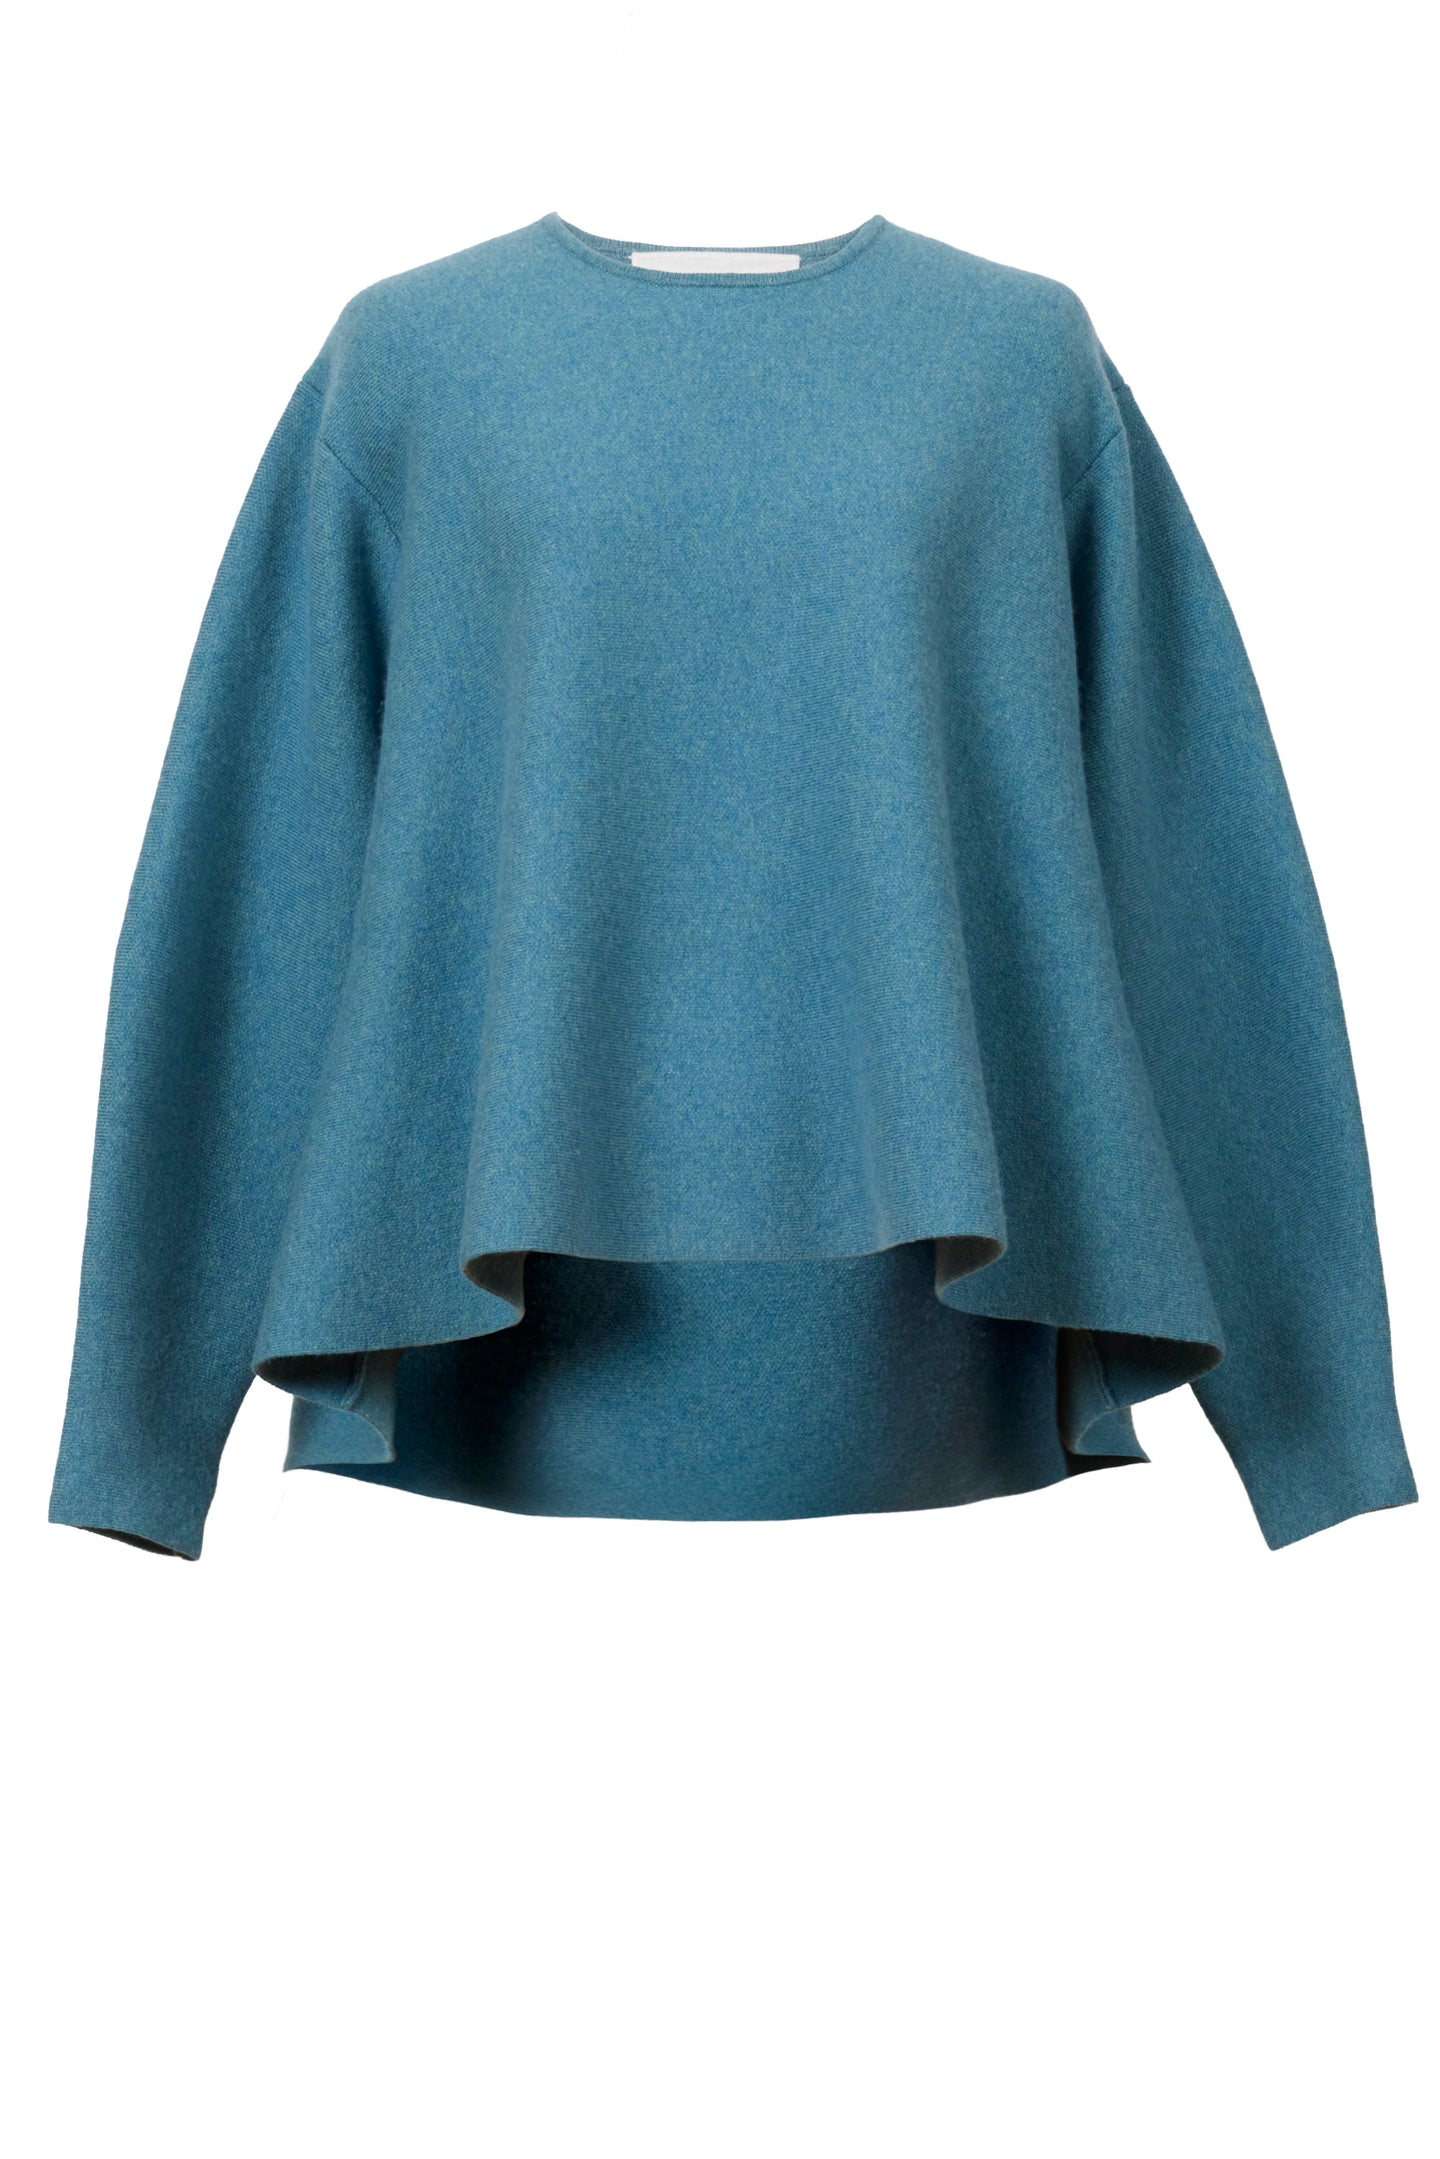 Wool Cashmere Knit Flare Top | Peacock